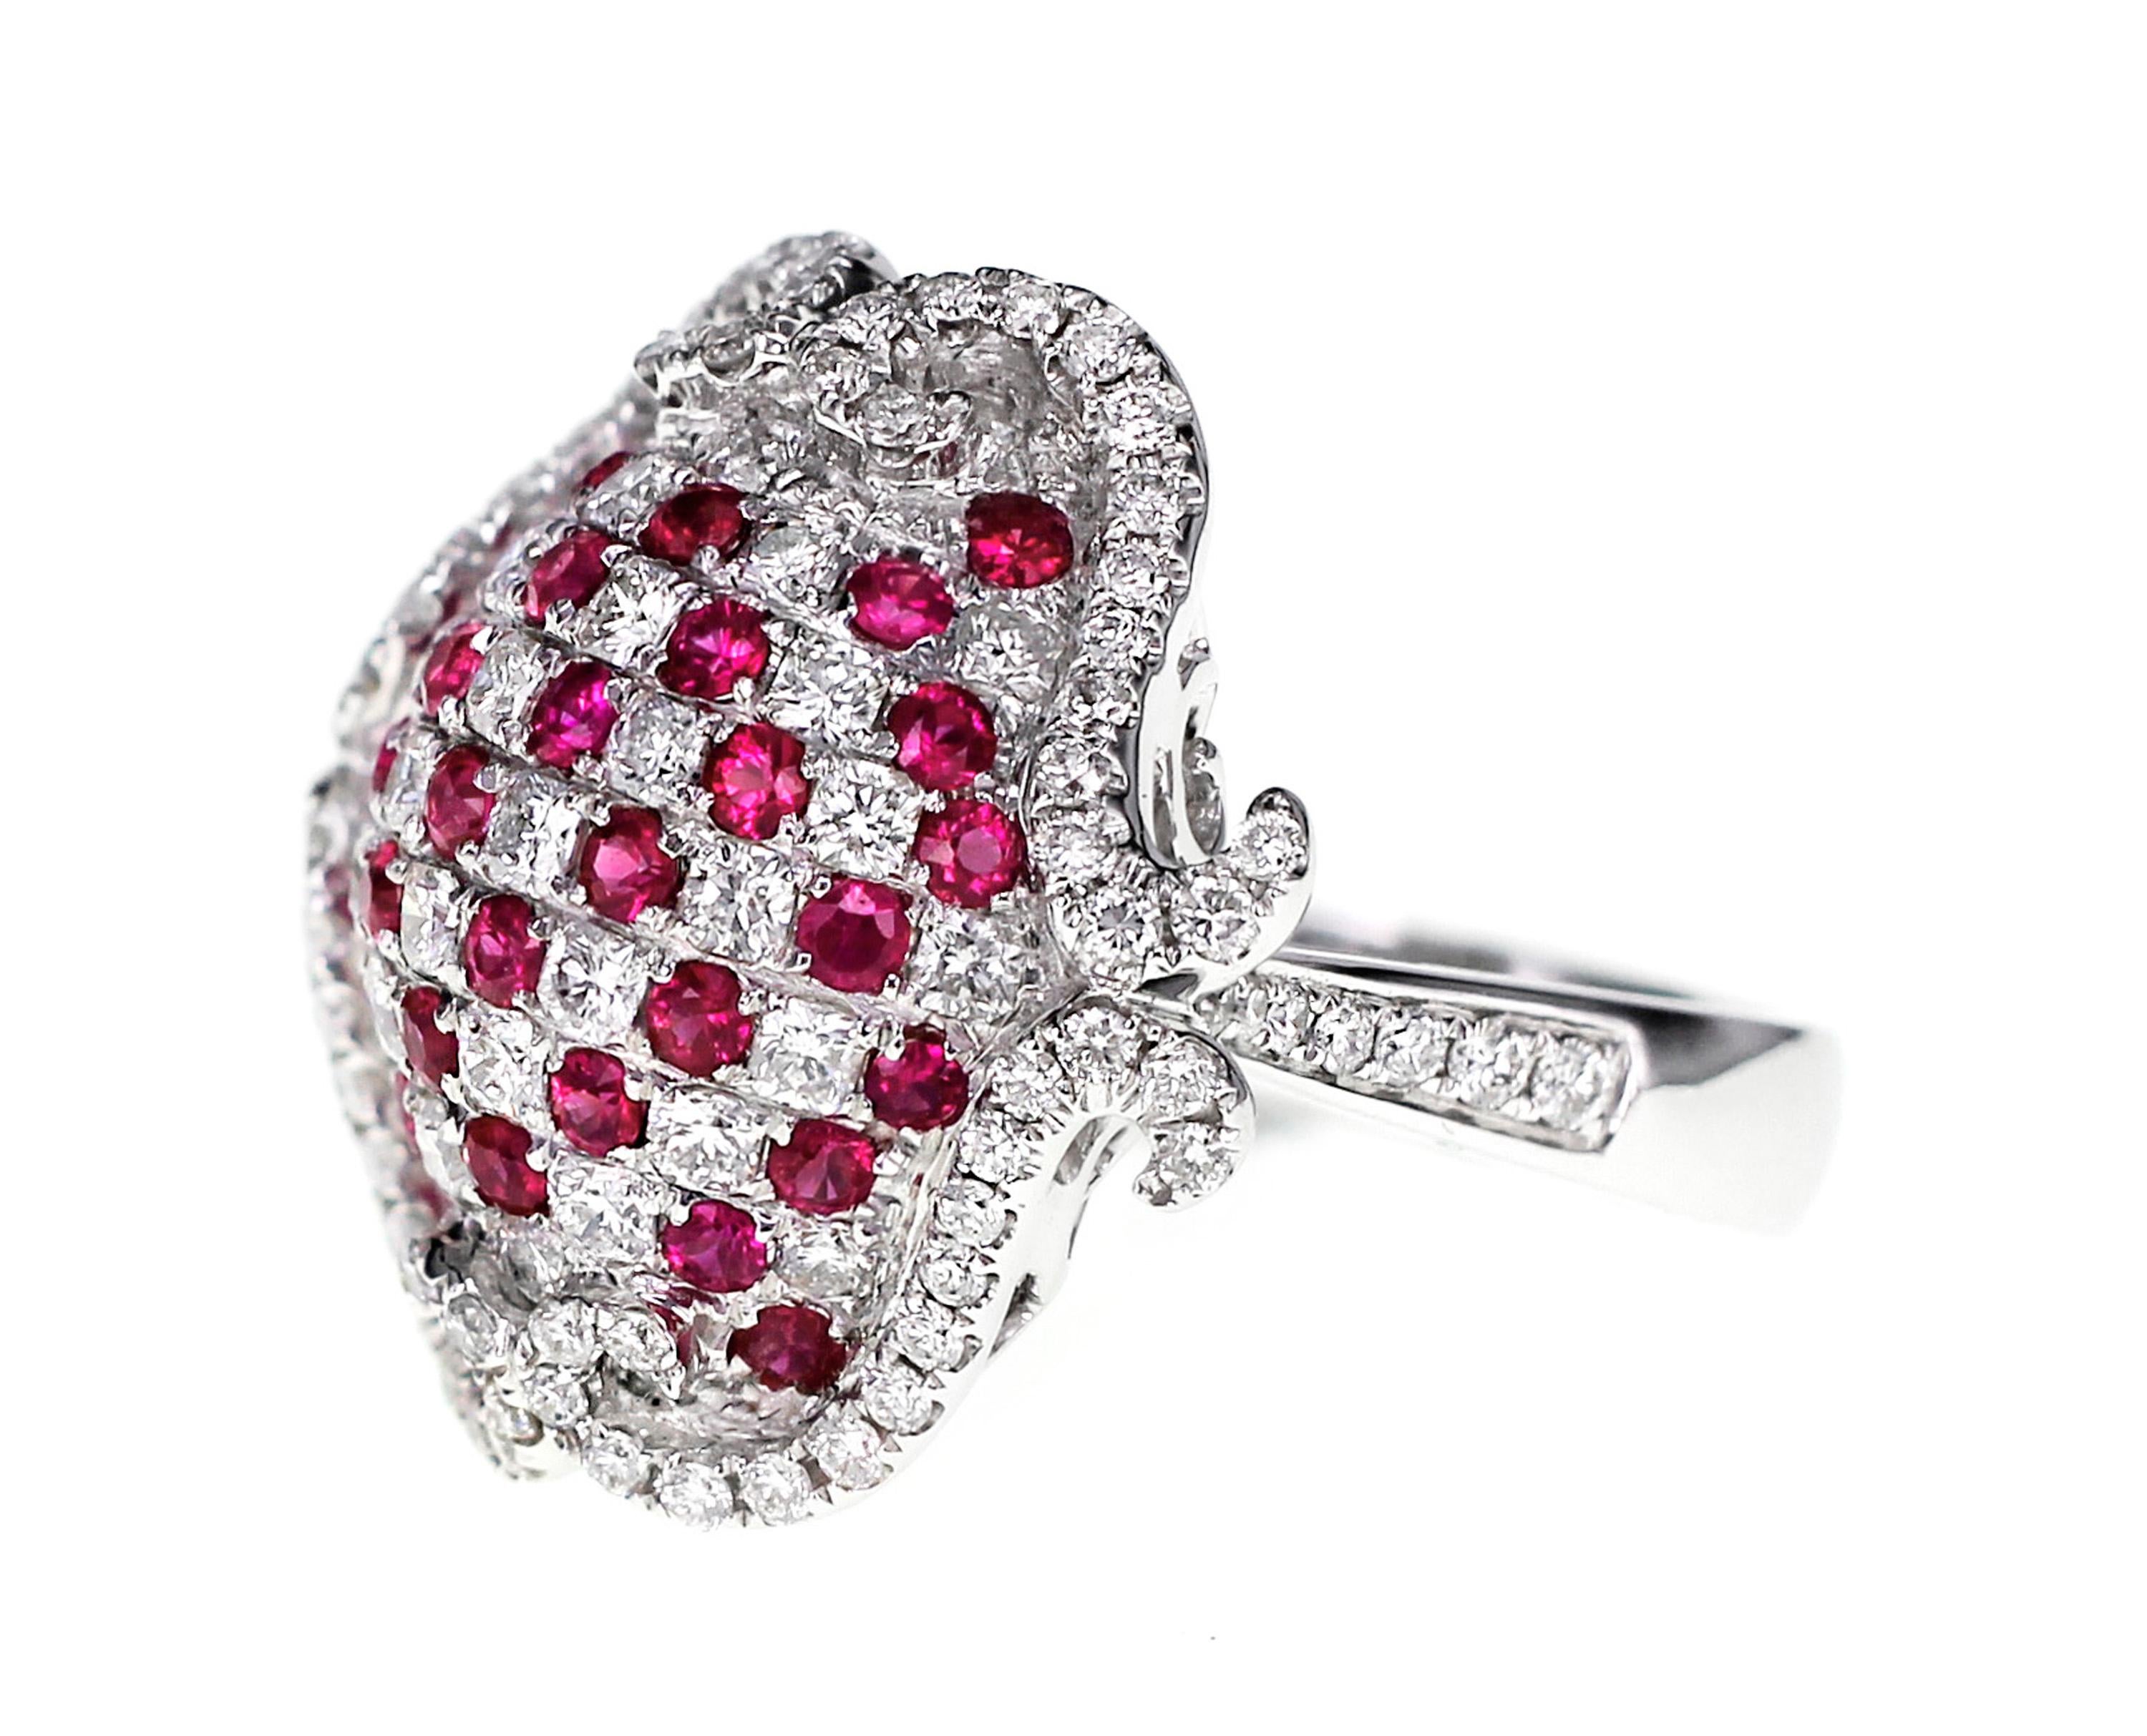 1.00 carat of vivid red ruby is set along with 1.5 carat of white brilliant round diamond in this turtle inspired cocktail ring.
Details of the ring are as follows:
Color: F
Clarity: Vs
Ring Size: US 6.5
The ring size can be changed on request.